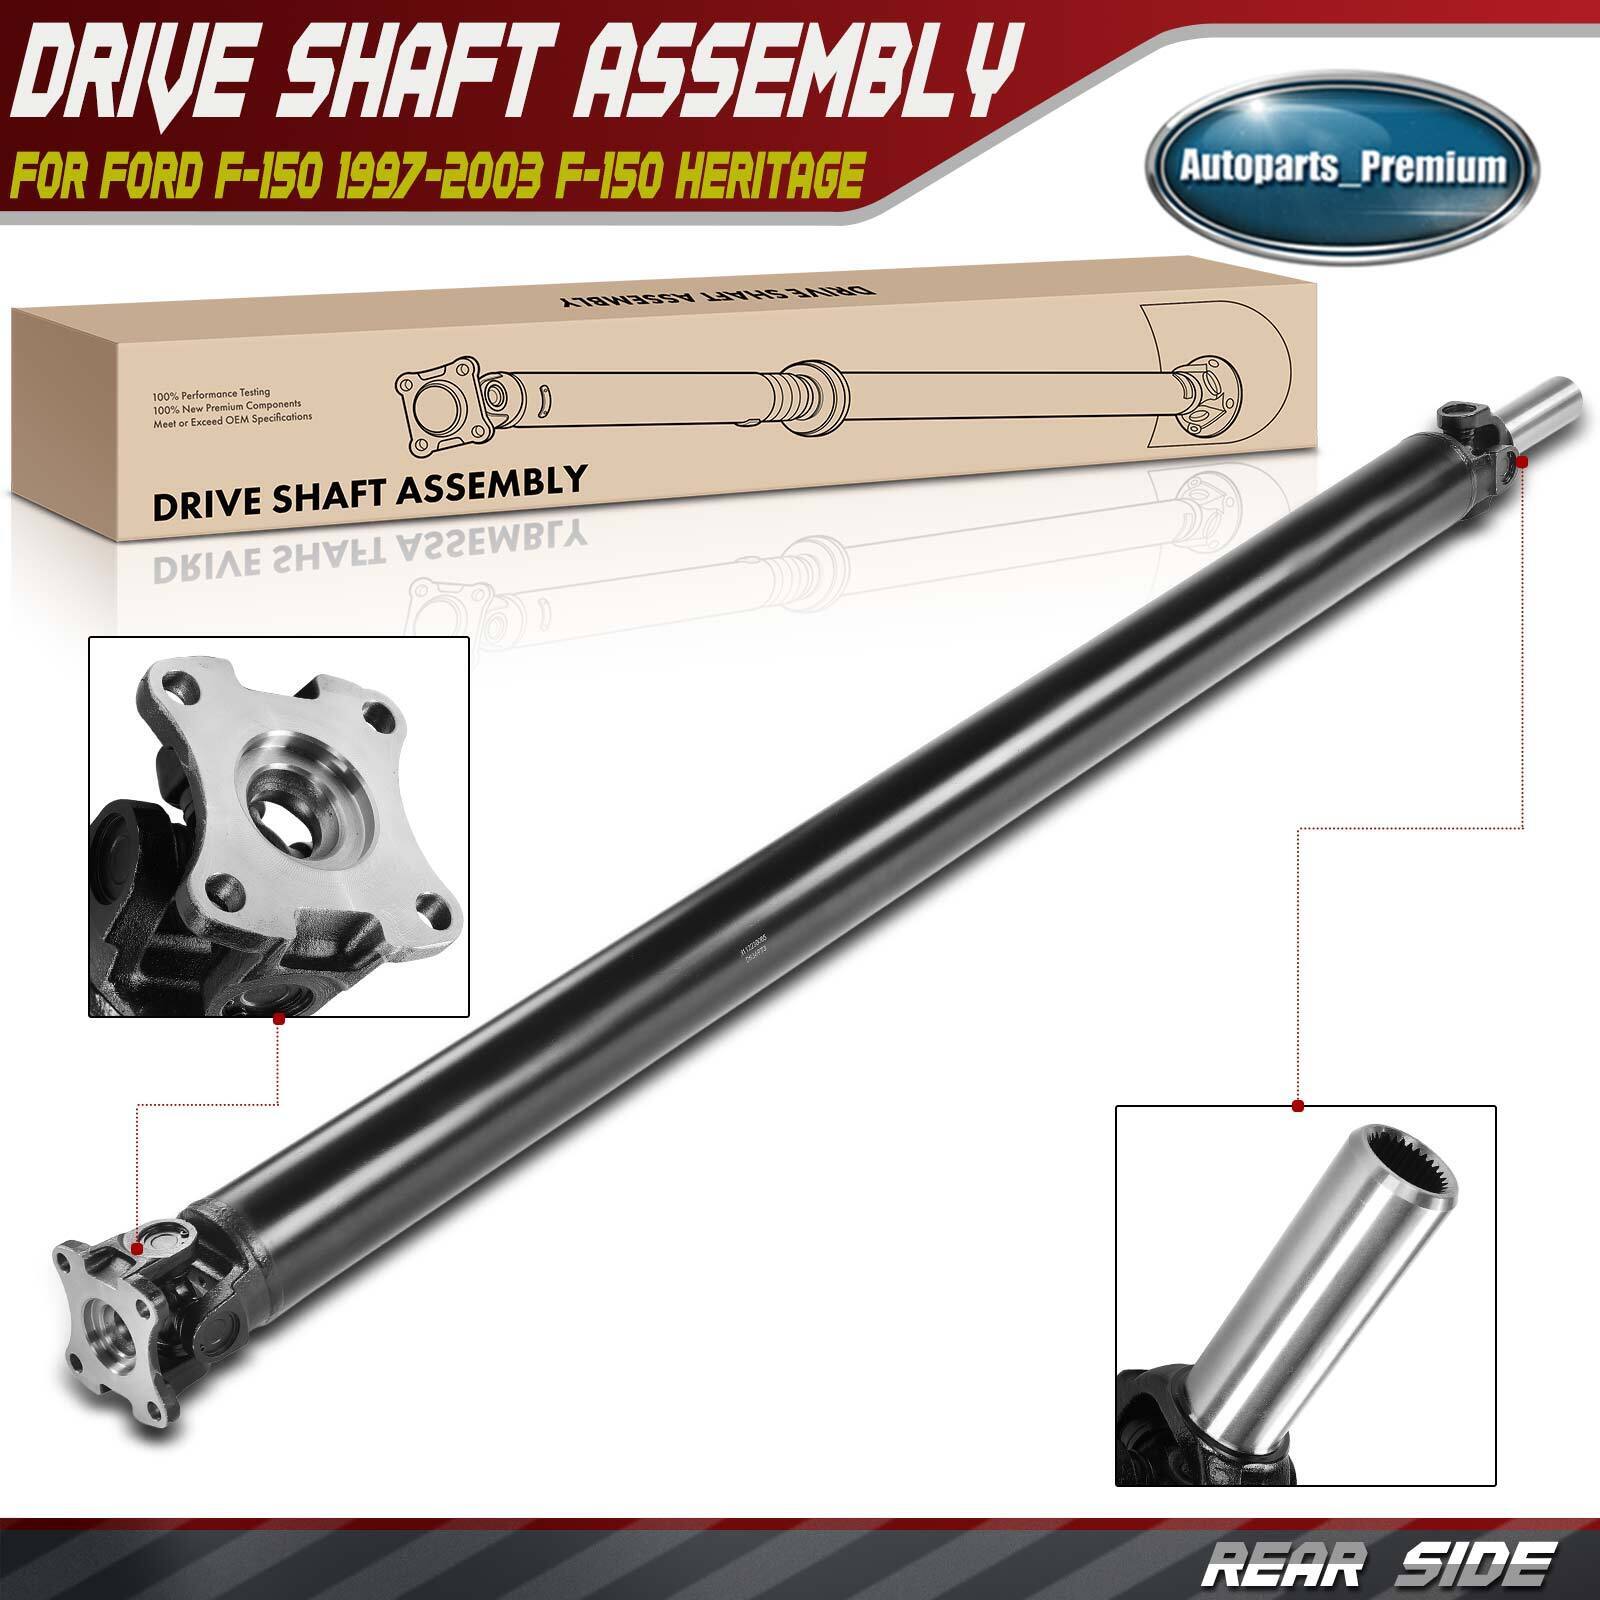 Rear Driveshaft Prop Shaft Assembly for Ford F-150 1997-2003 F-150 Heritage 4WD